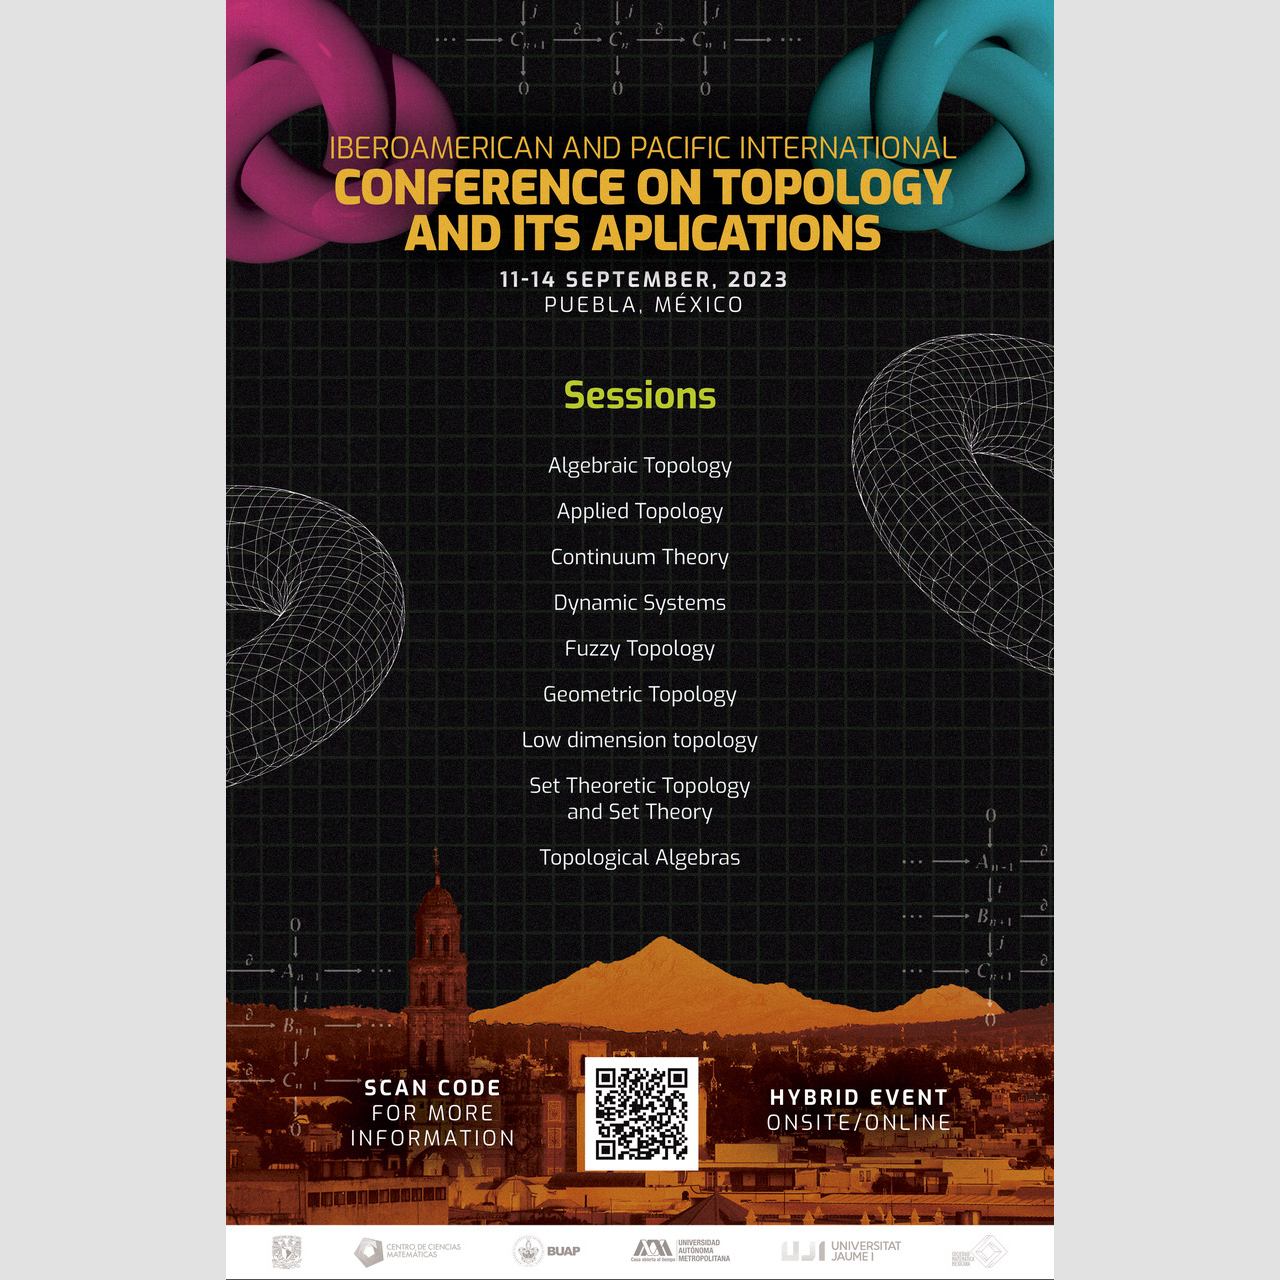 Iberoamerican and Pacific International Conference on Topology and its Aplications